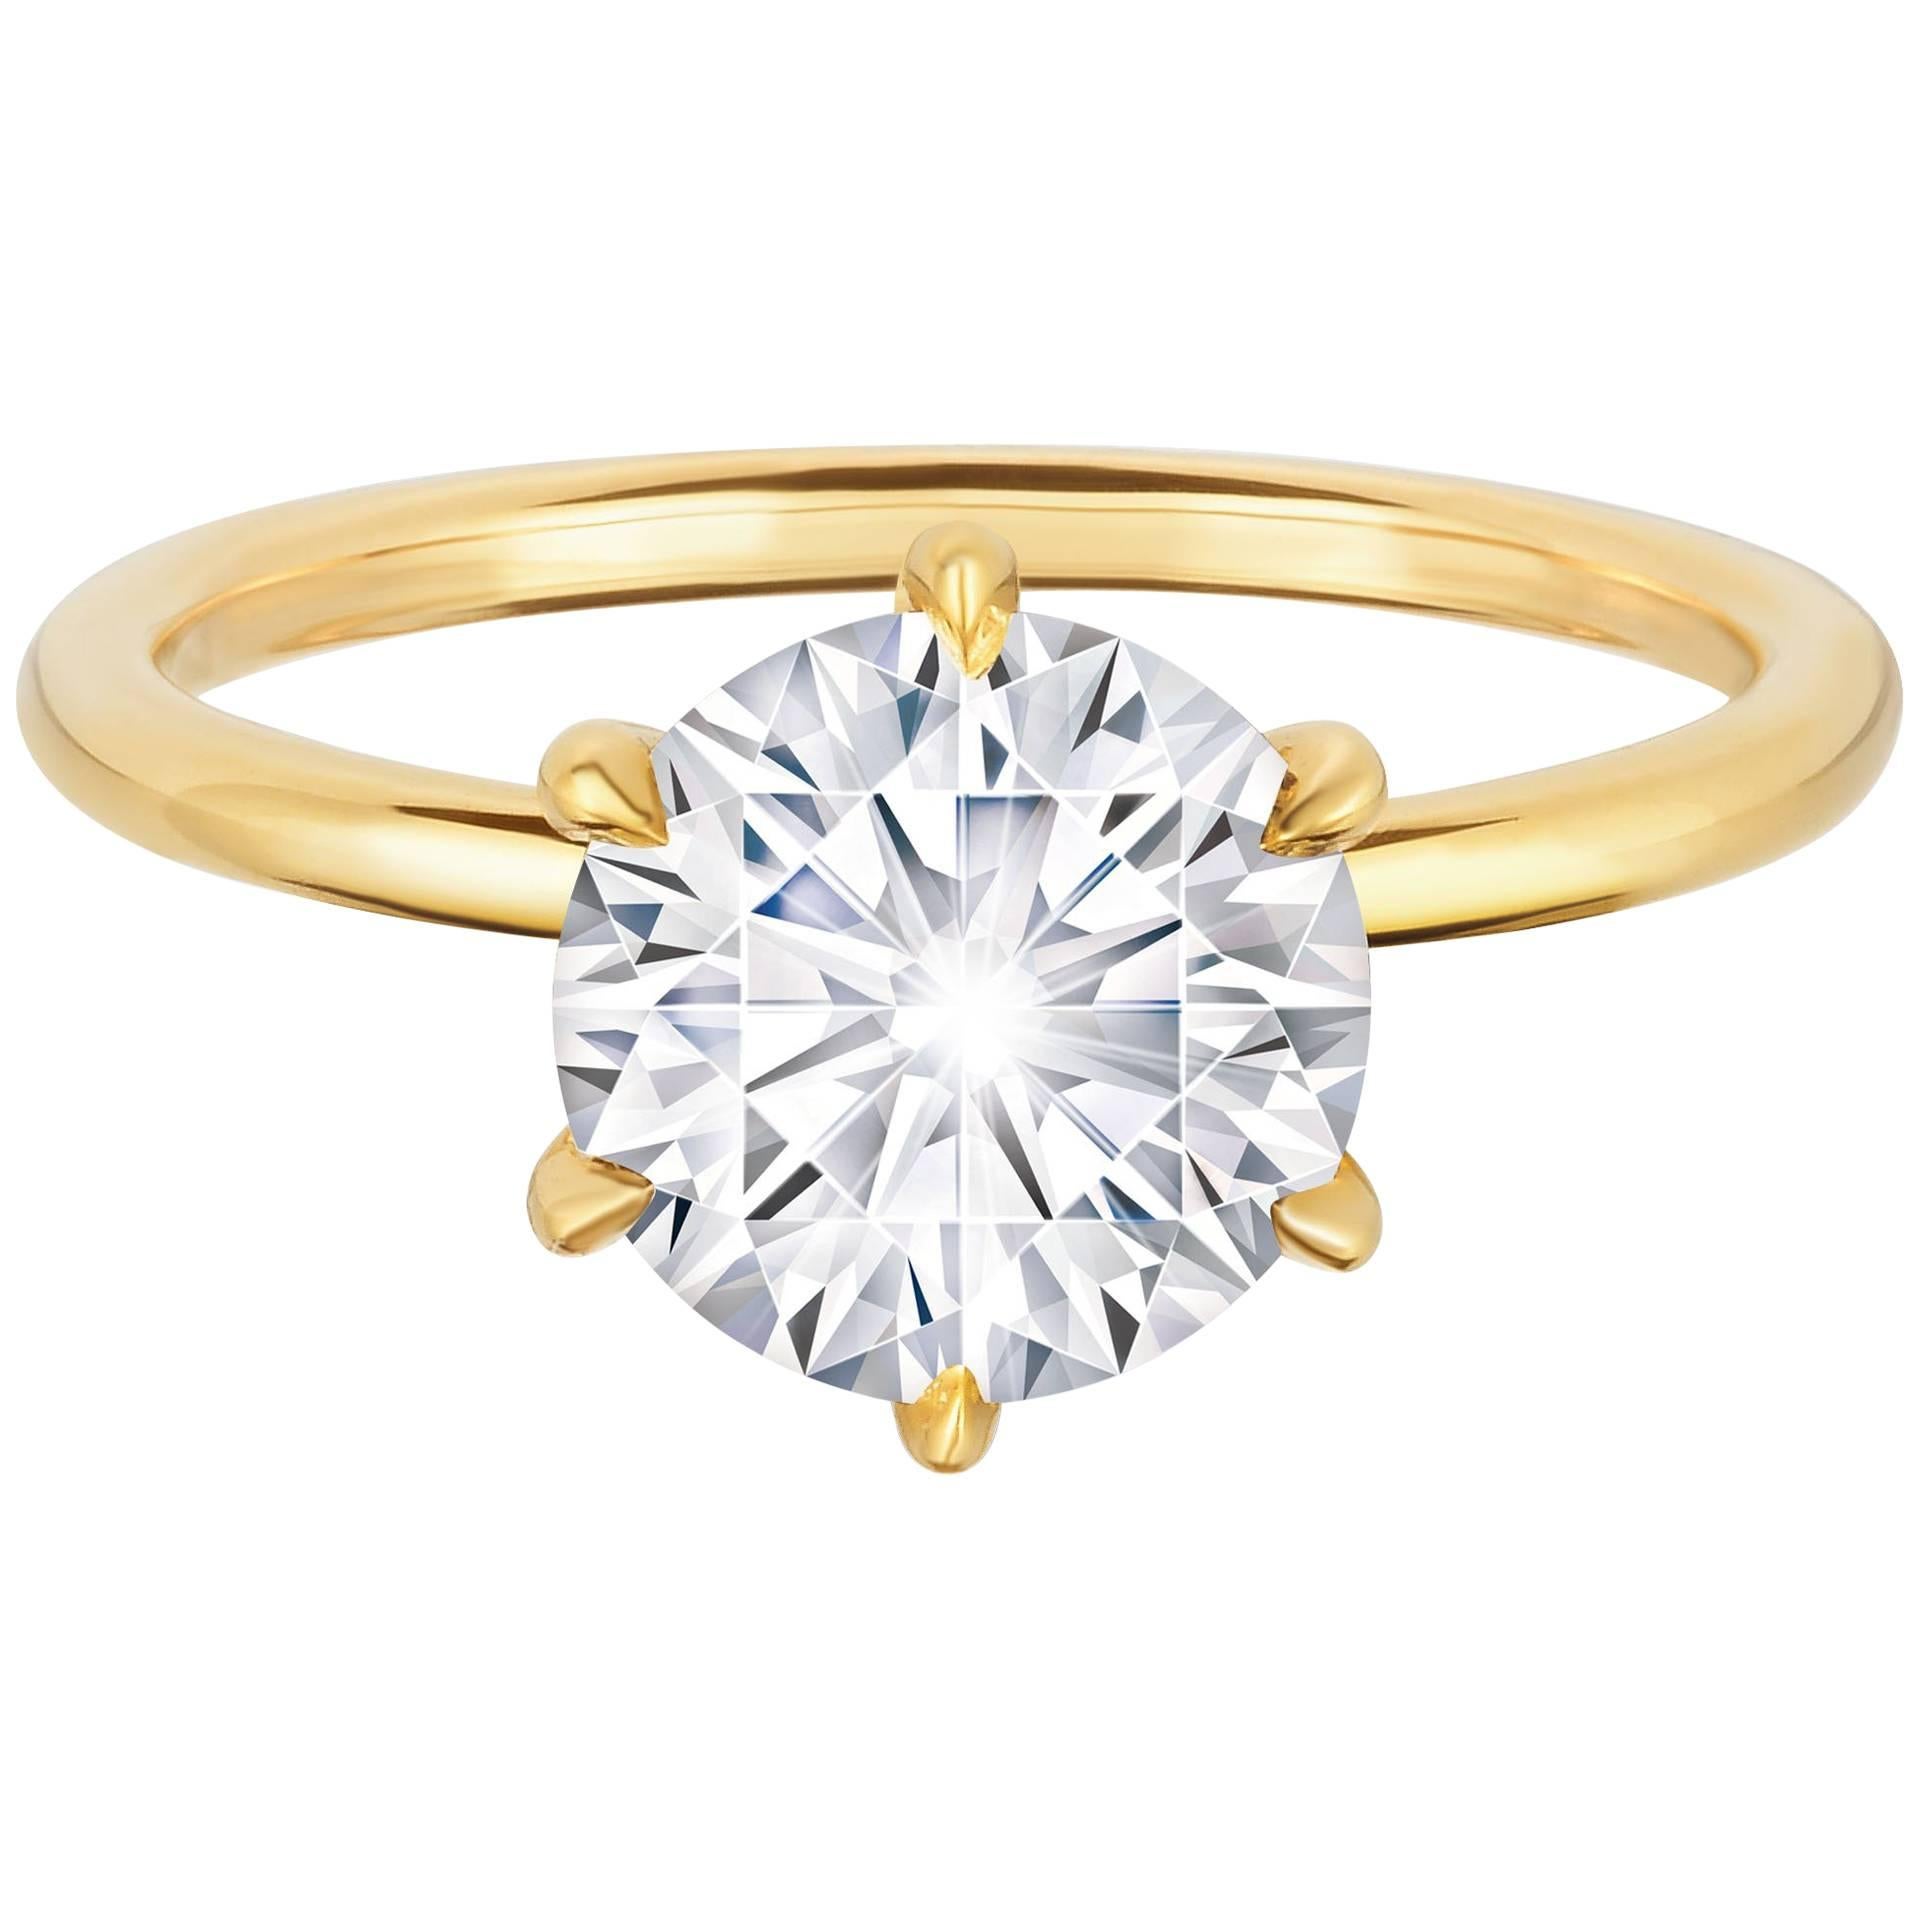 Marisa Perry 2.08 Carat Six Prong Diamond Engagement Ring in Yellow Gold For Sale